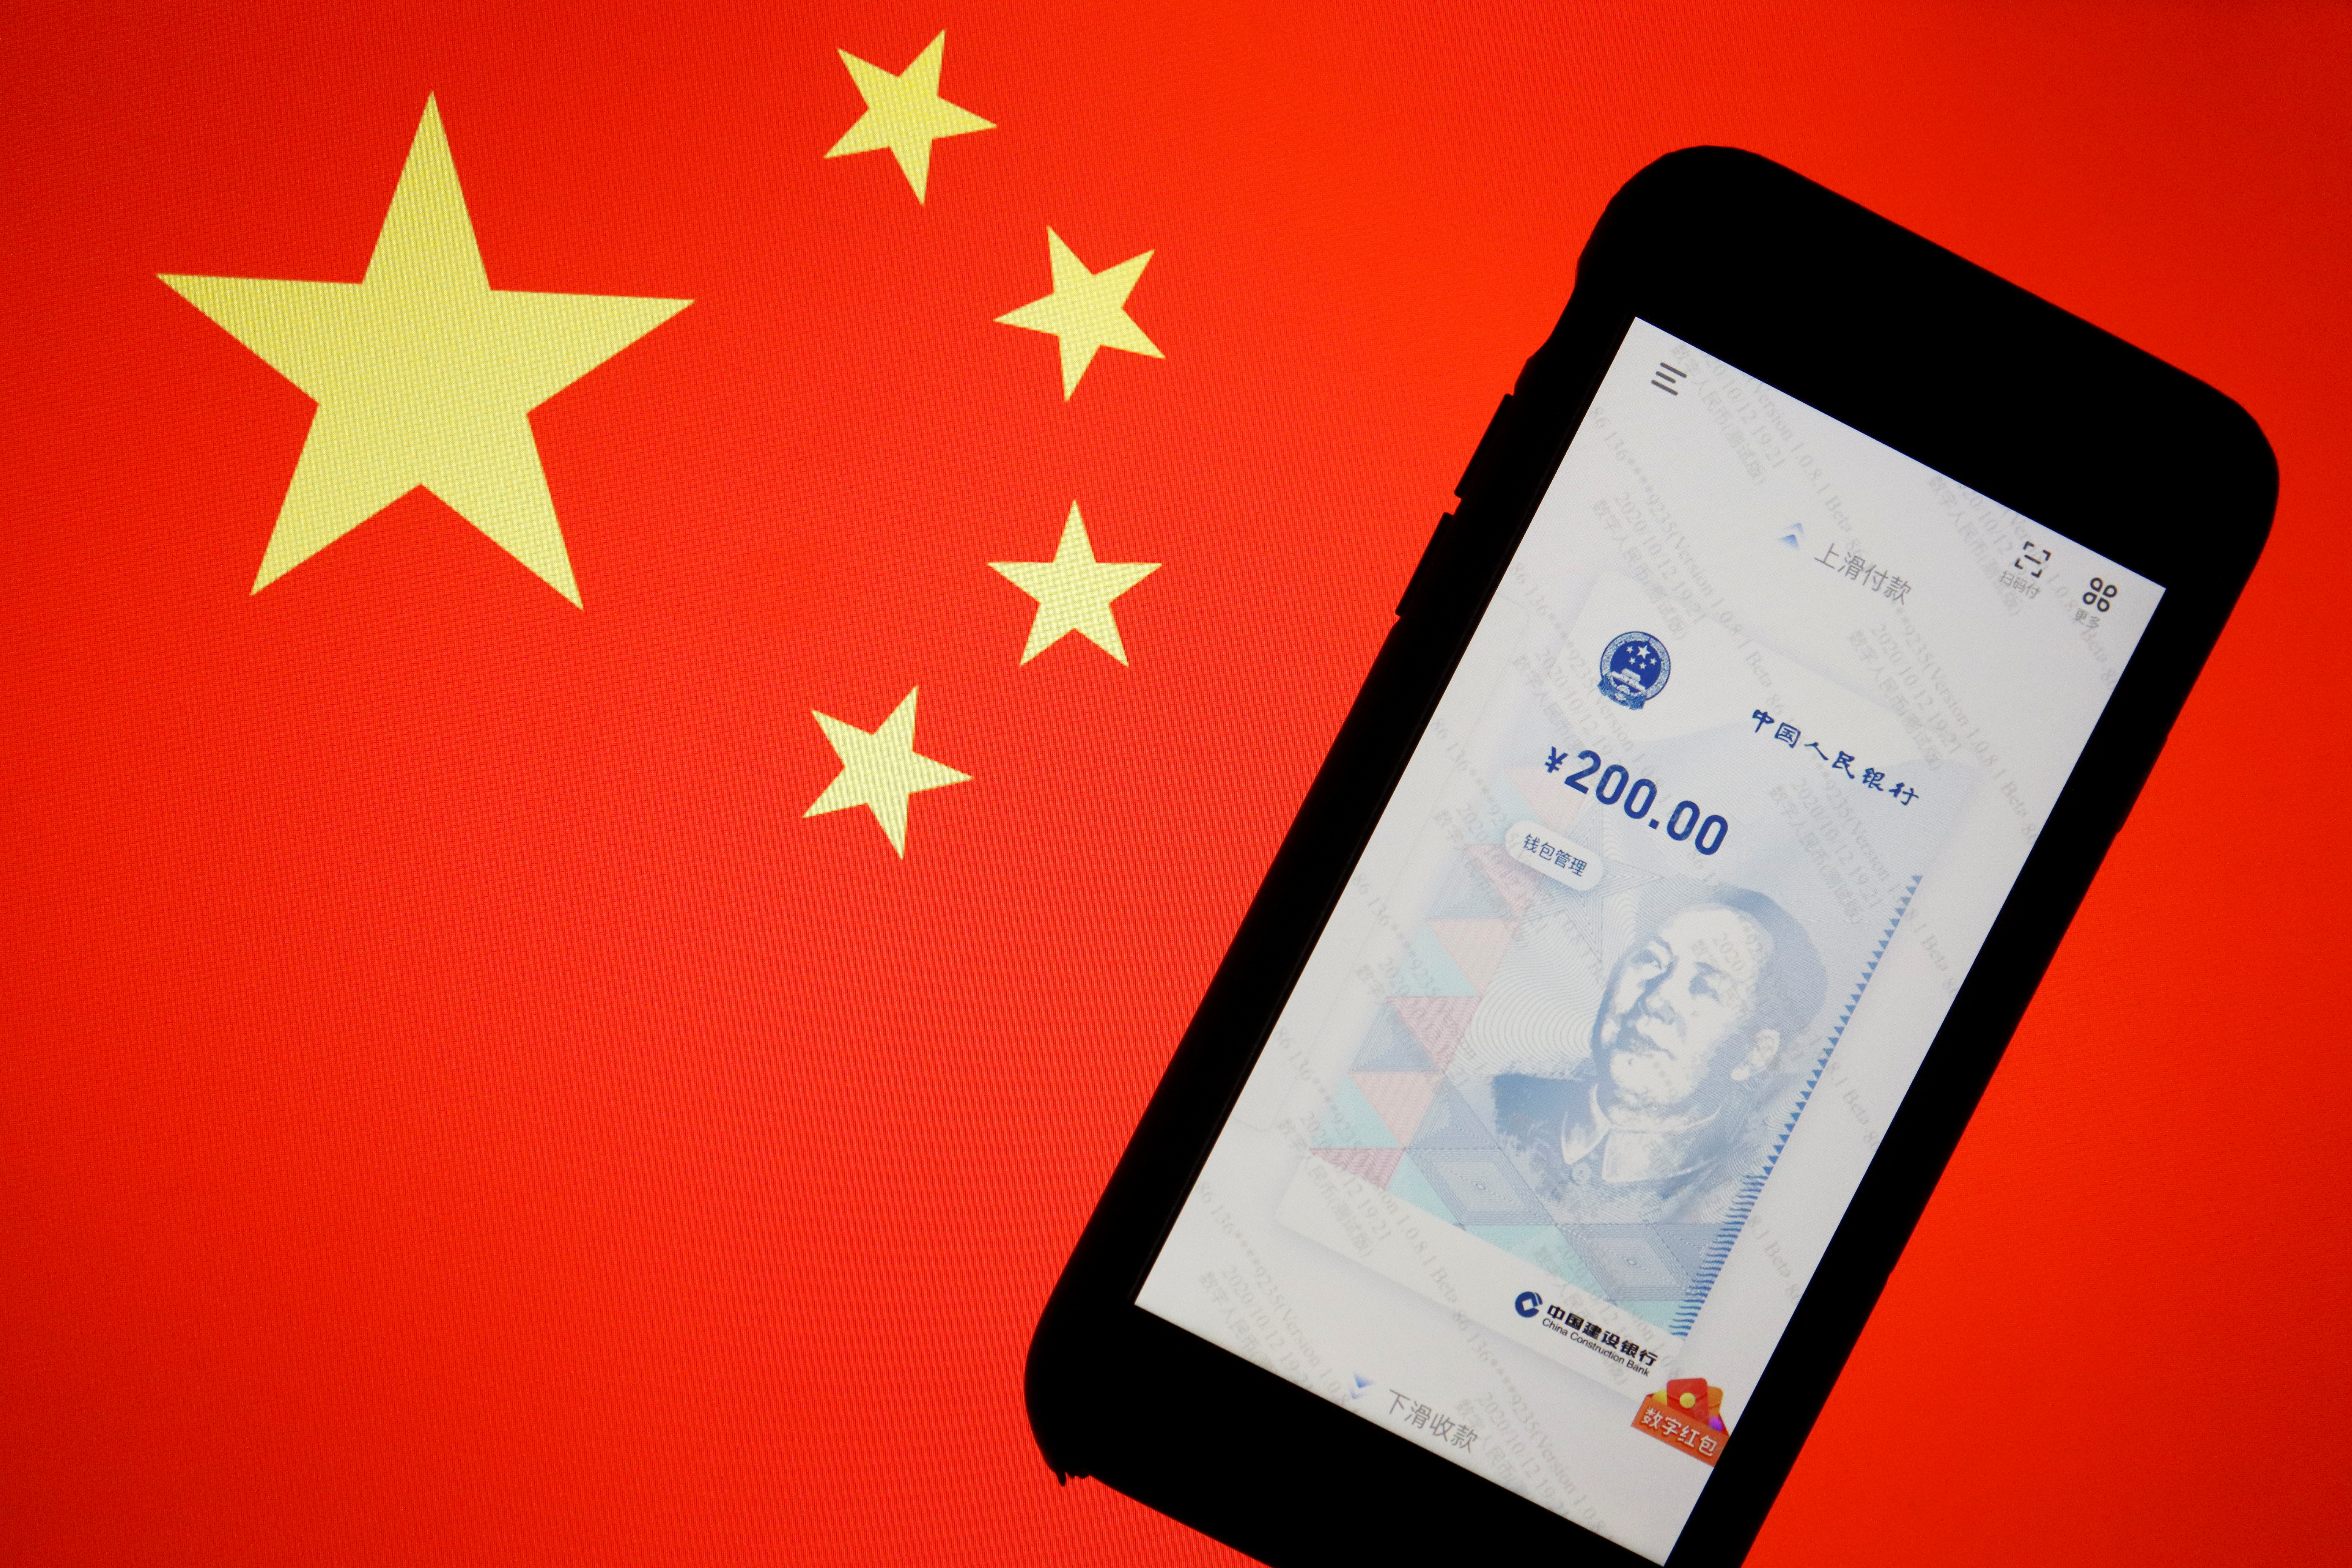 China's official app for digital yuan is seen on a mobile phone placed in front of an image of the Chinese flag, in this illustration. REUTERS/Florence Lo/Illustration